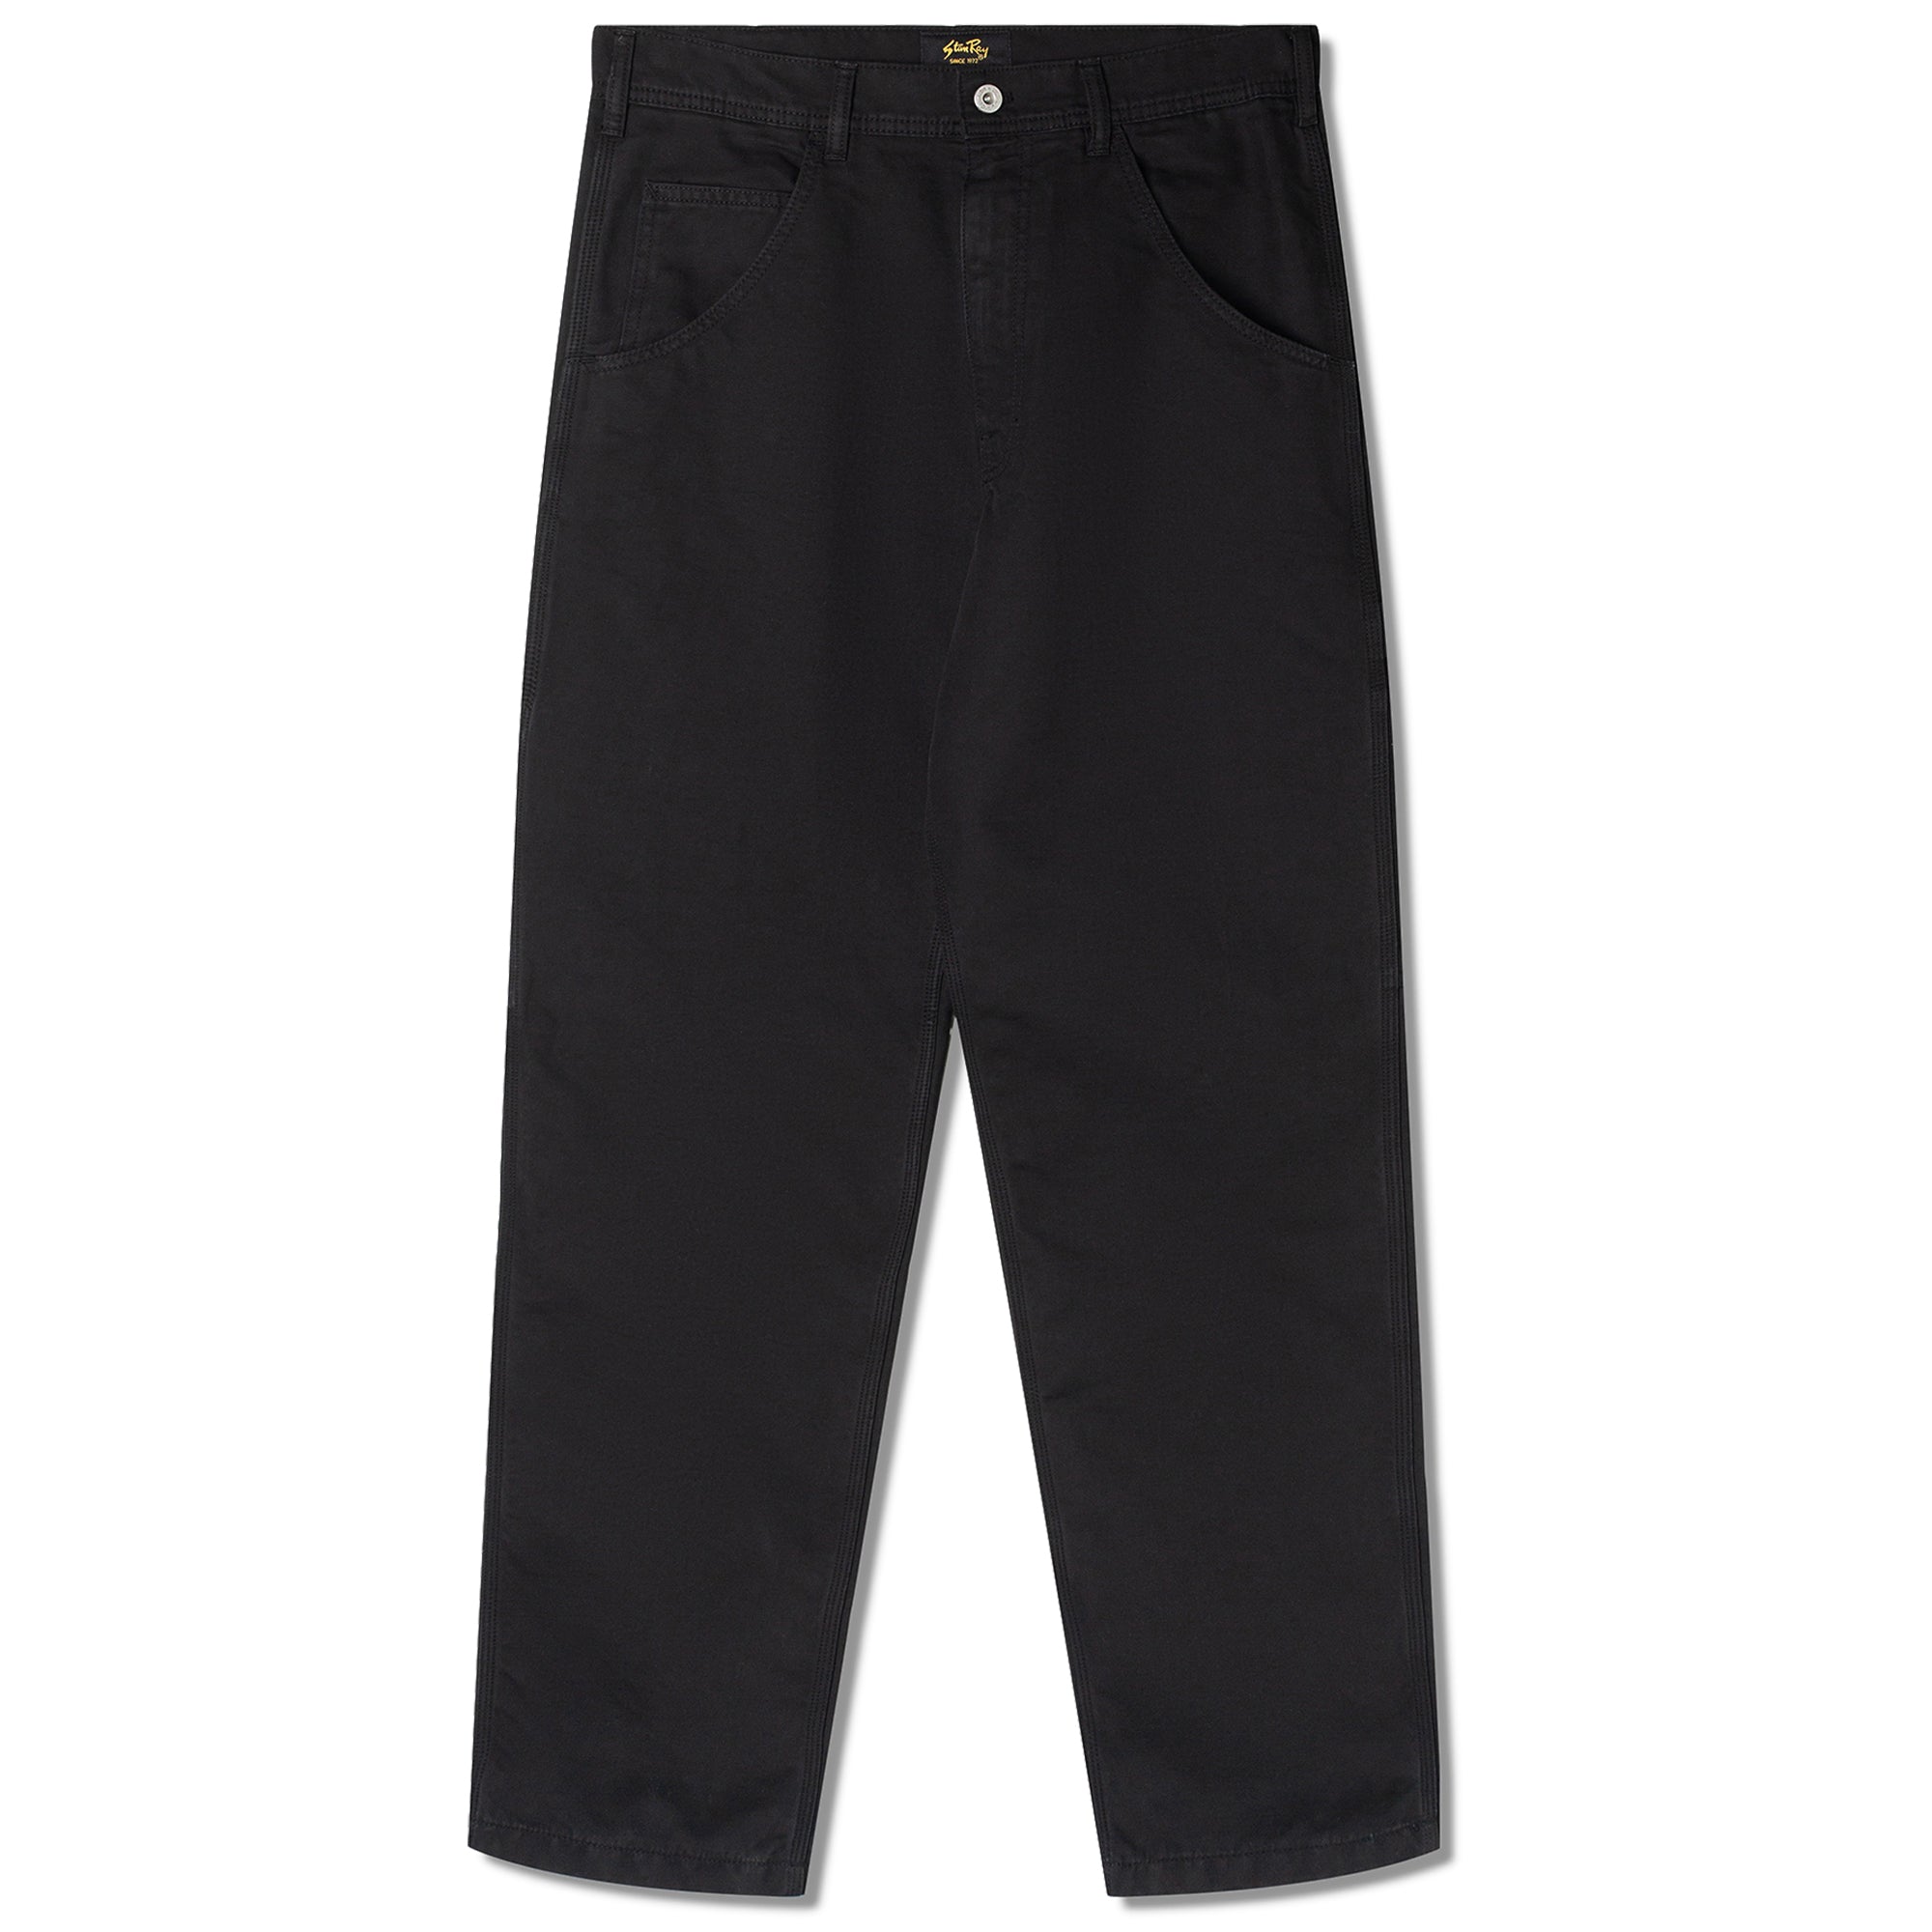 Stan Ray 80s Painter Pant - Black Twill